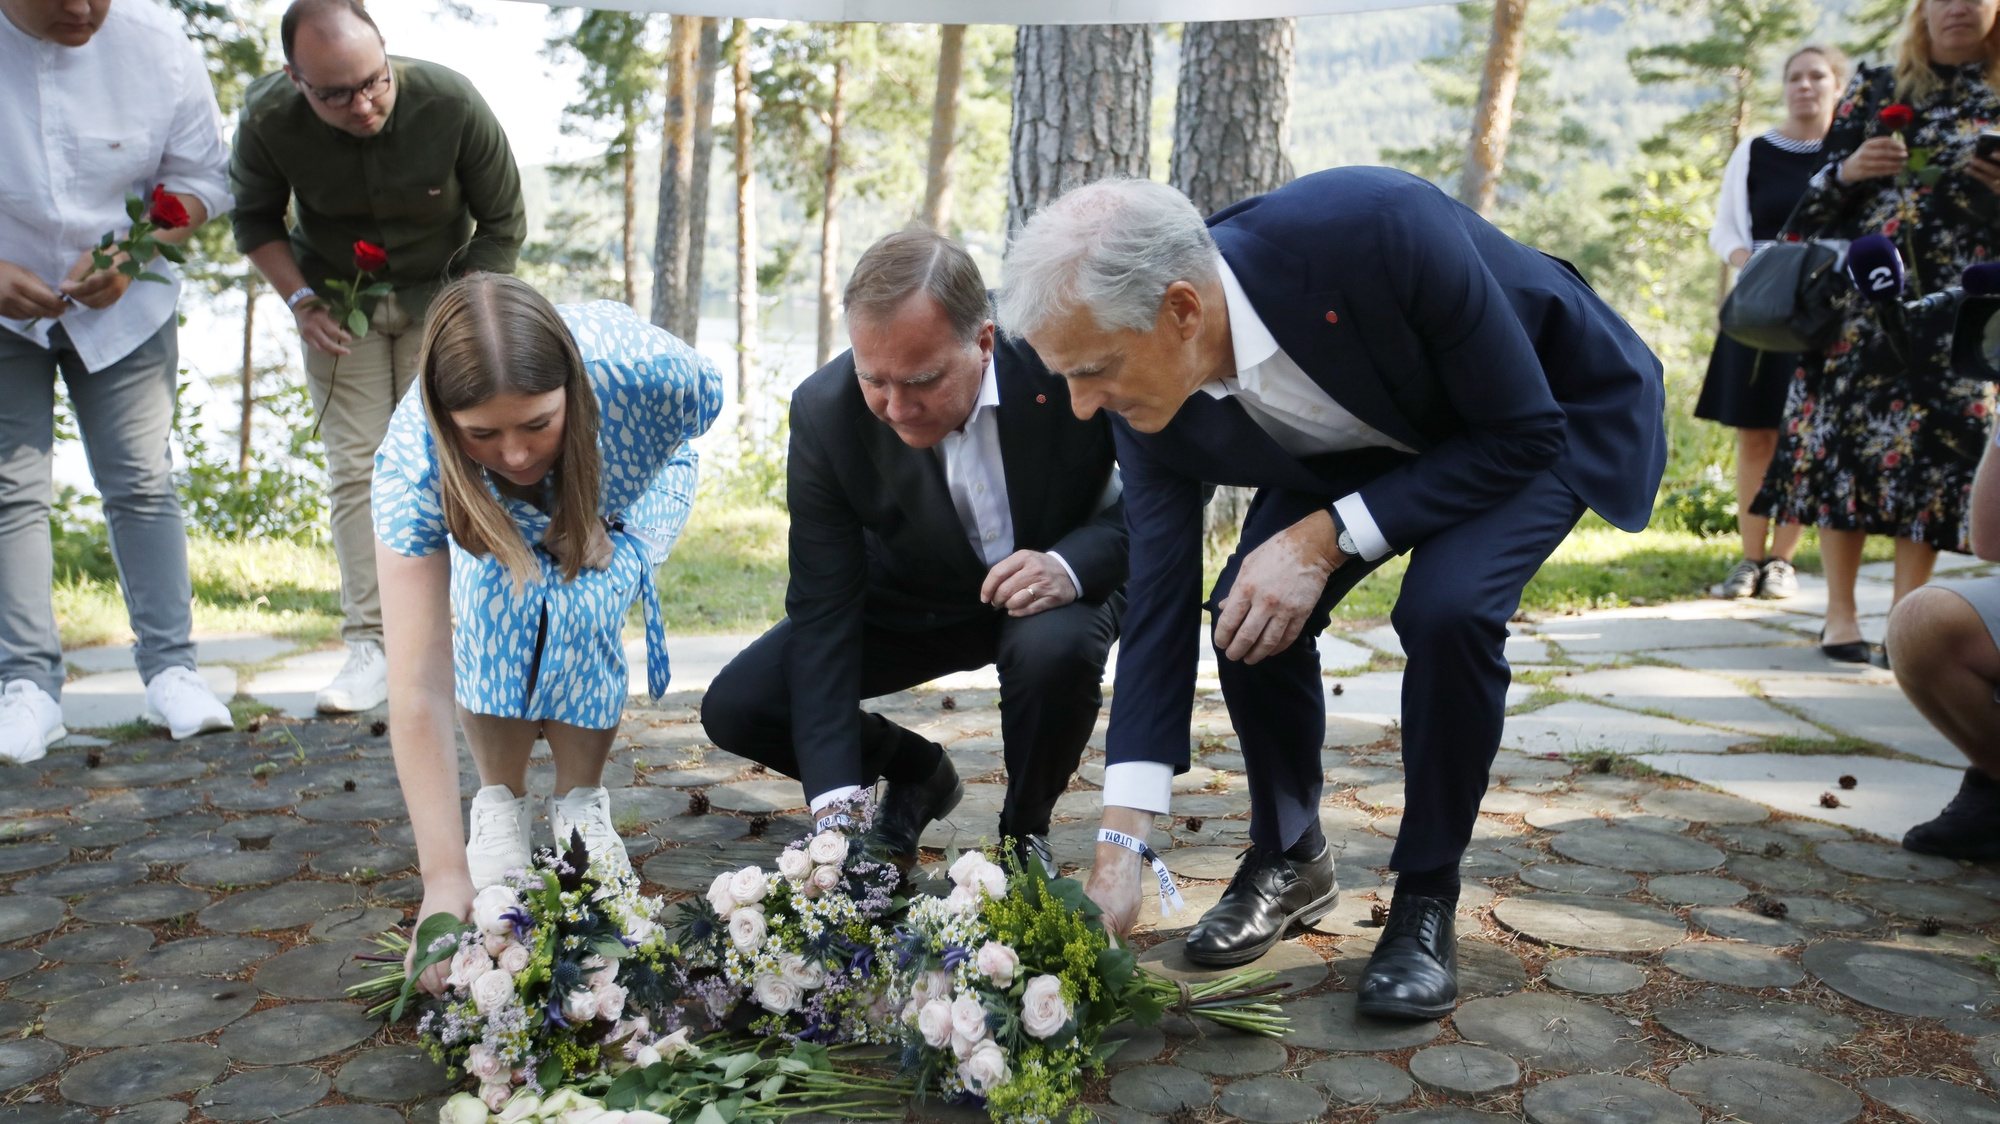 epa09356447 Leader of AUF in Norway, Astrid Hoem, Prime Minister of Sweden Stefan Loefven and leader of the Norwegian Labor Party Jonas Gahr Store lay flowers at the memorial on Utoya the day before the 10th anniversary of the terrorist attack on 22 July 2011. Norway marks 10 years since 22 July 2011, when 77 people were killed by an act of terrorism, eight in the governmental quarters in Oslo, and 69 at the Social Democratic Youth party&#039;s summer camp on the island of Utoya.  EPA/BEATE OMA DAHLE  NORWAY OUT